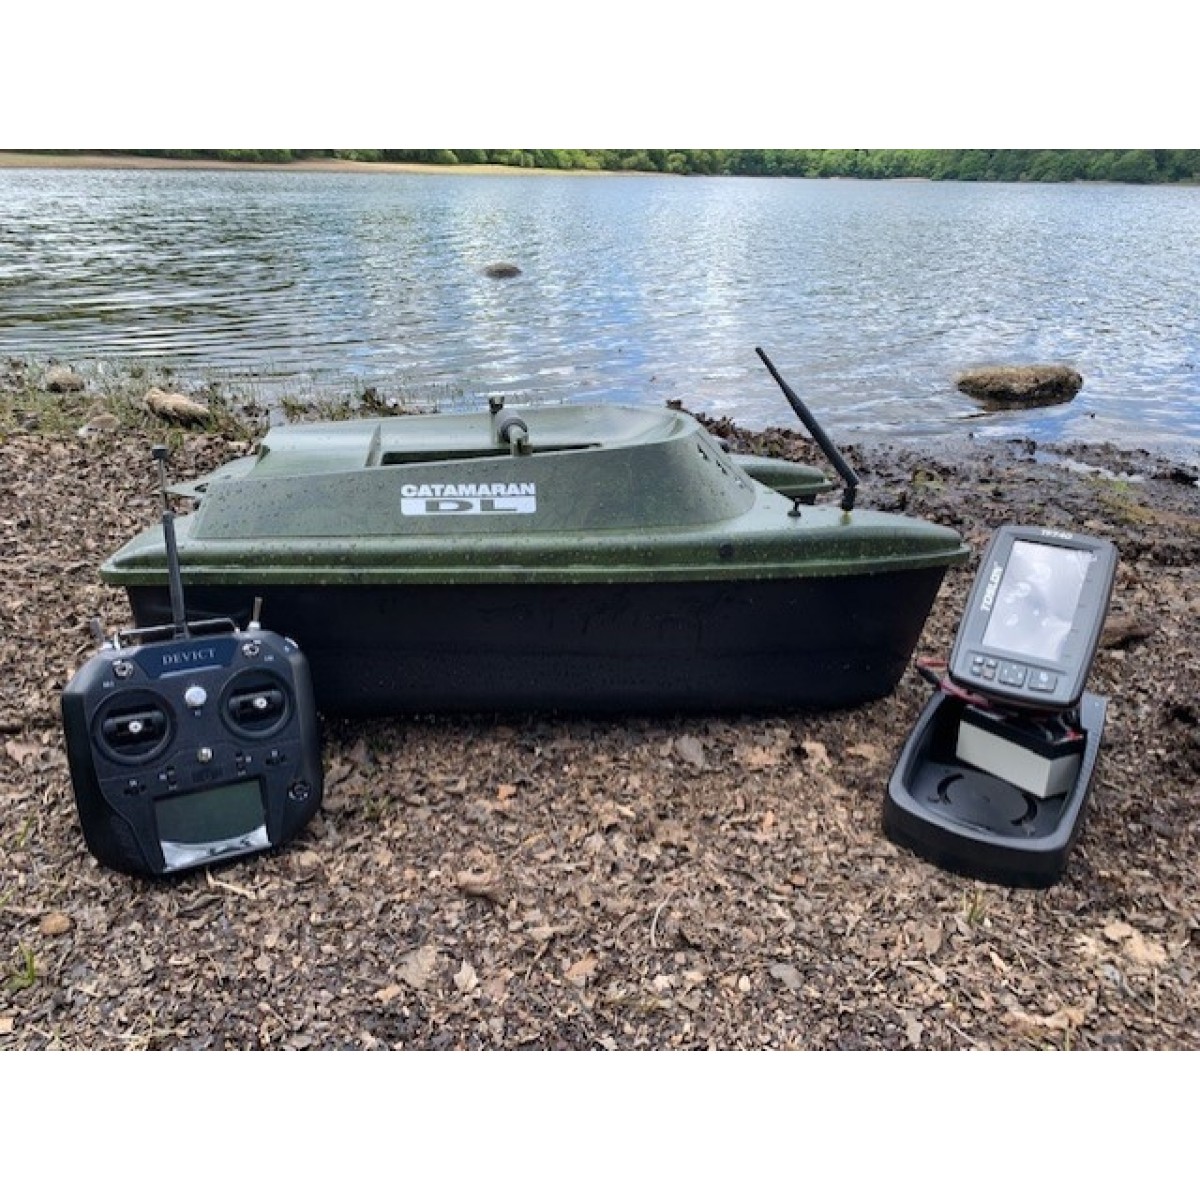 EagleFinder Bait boat with GPS and sonar fish finder integrated in